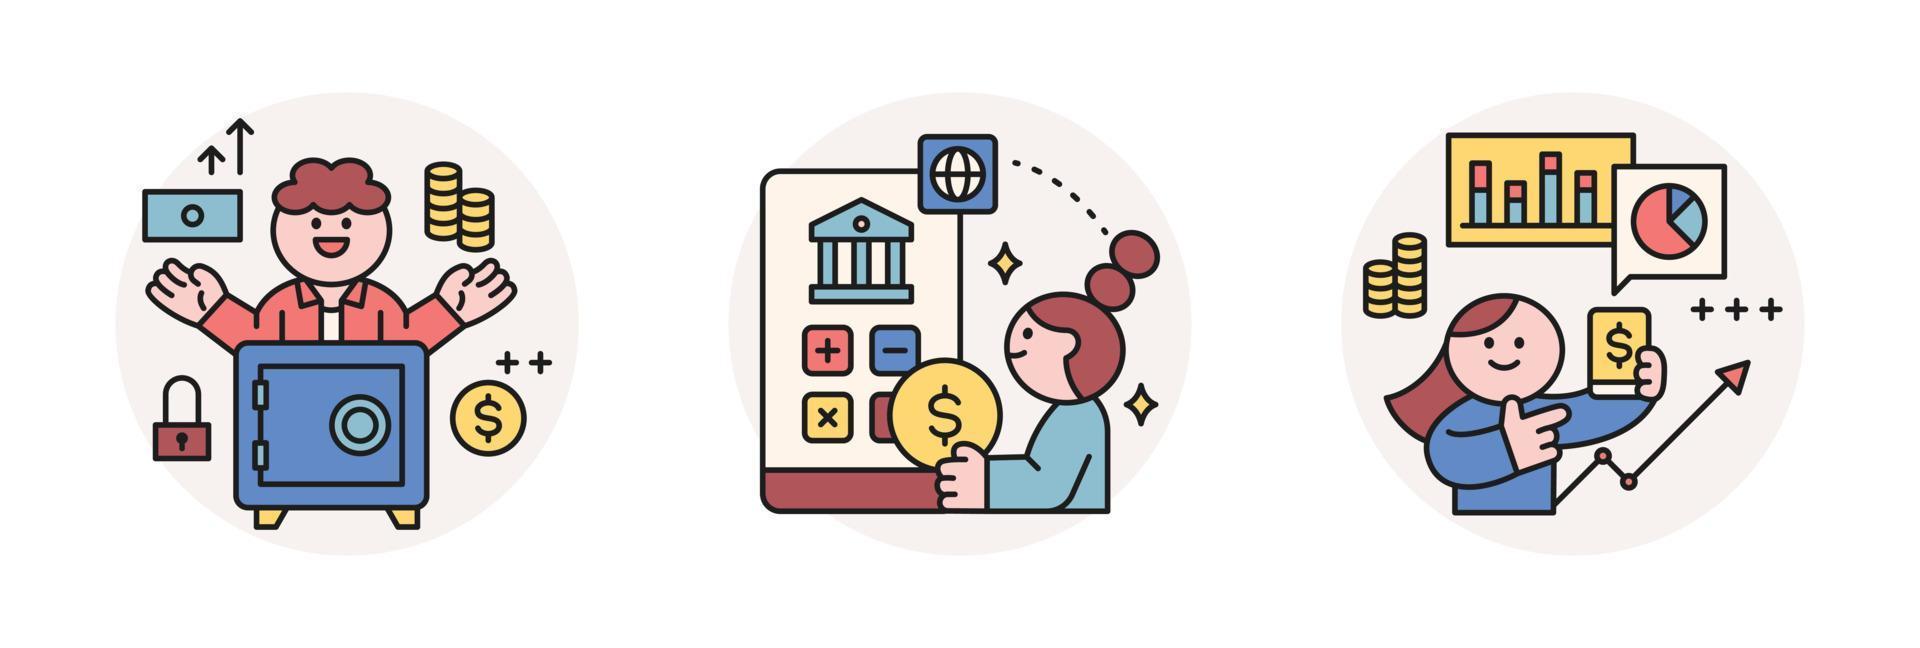 Finance and people, accounts for household economic growth, investment plan management. Vault, mobile banking, financial data. Vector illustration.